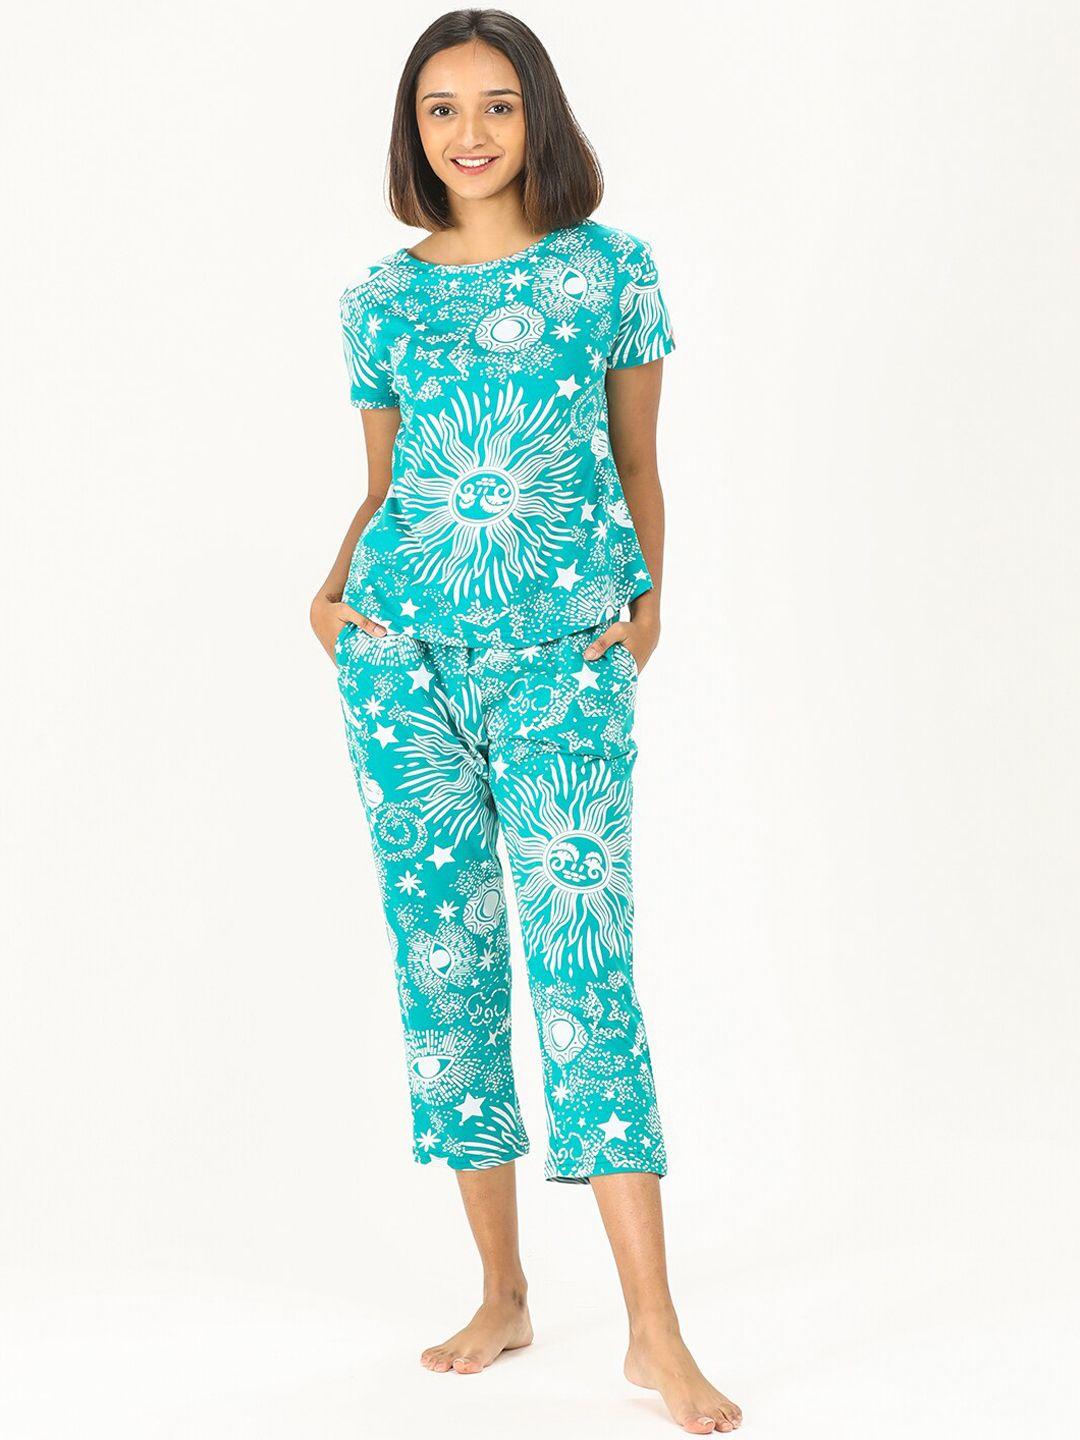 evolove women teal & white printed night suit